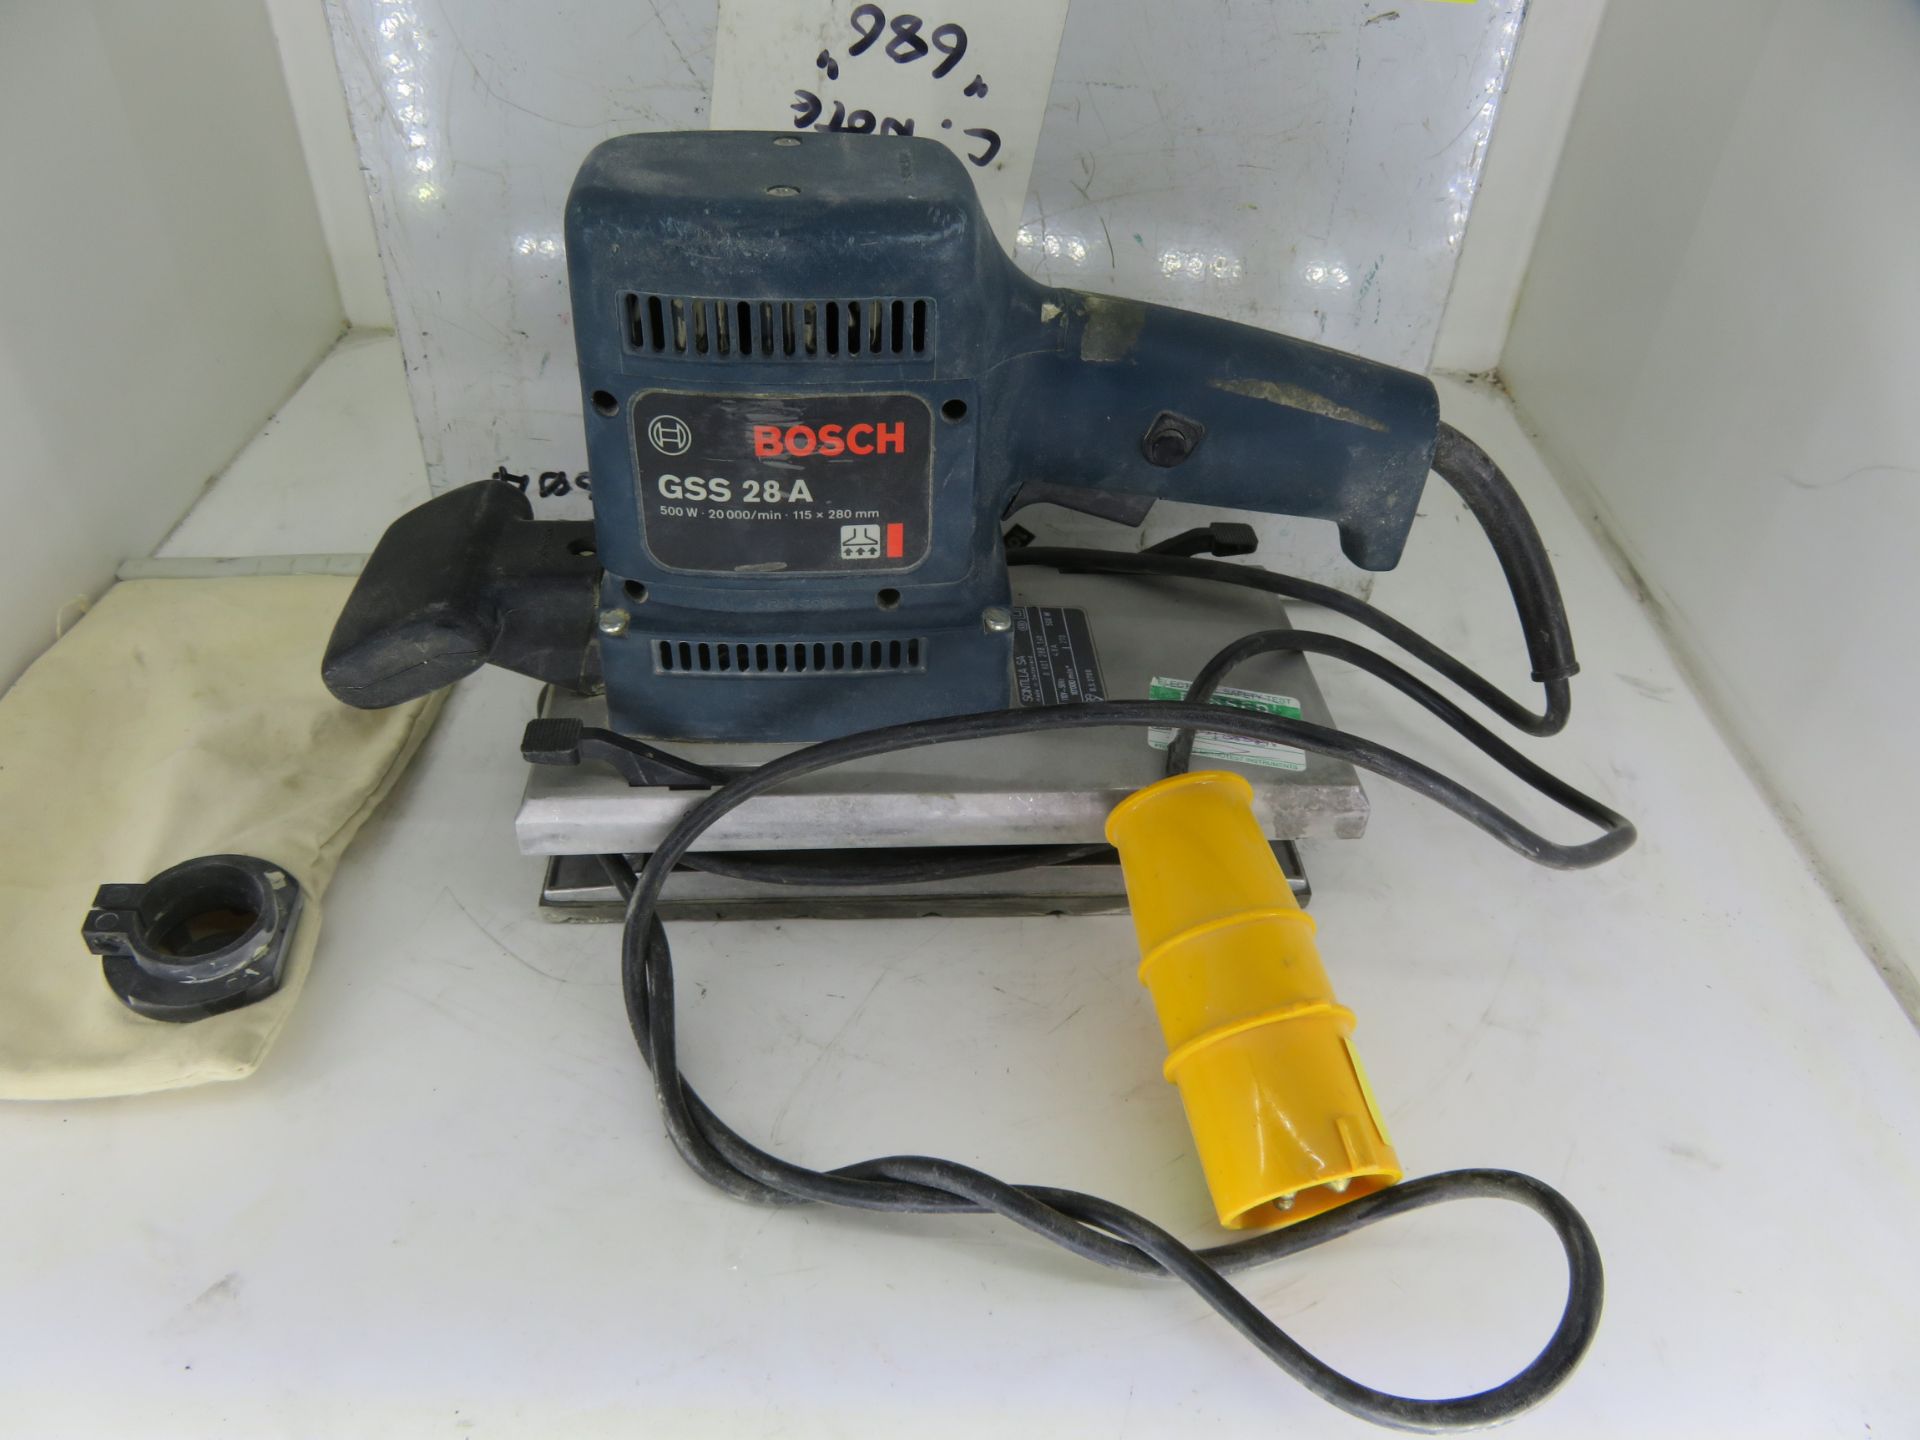 Bosch GSS 28 A Electric Oscillating Sander - Image 2 of 4